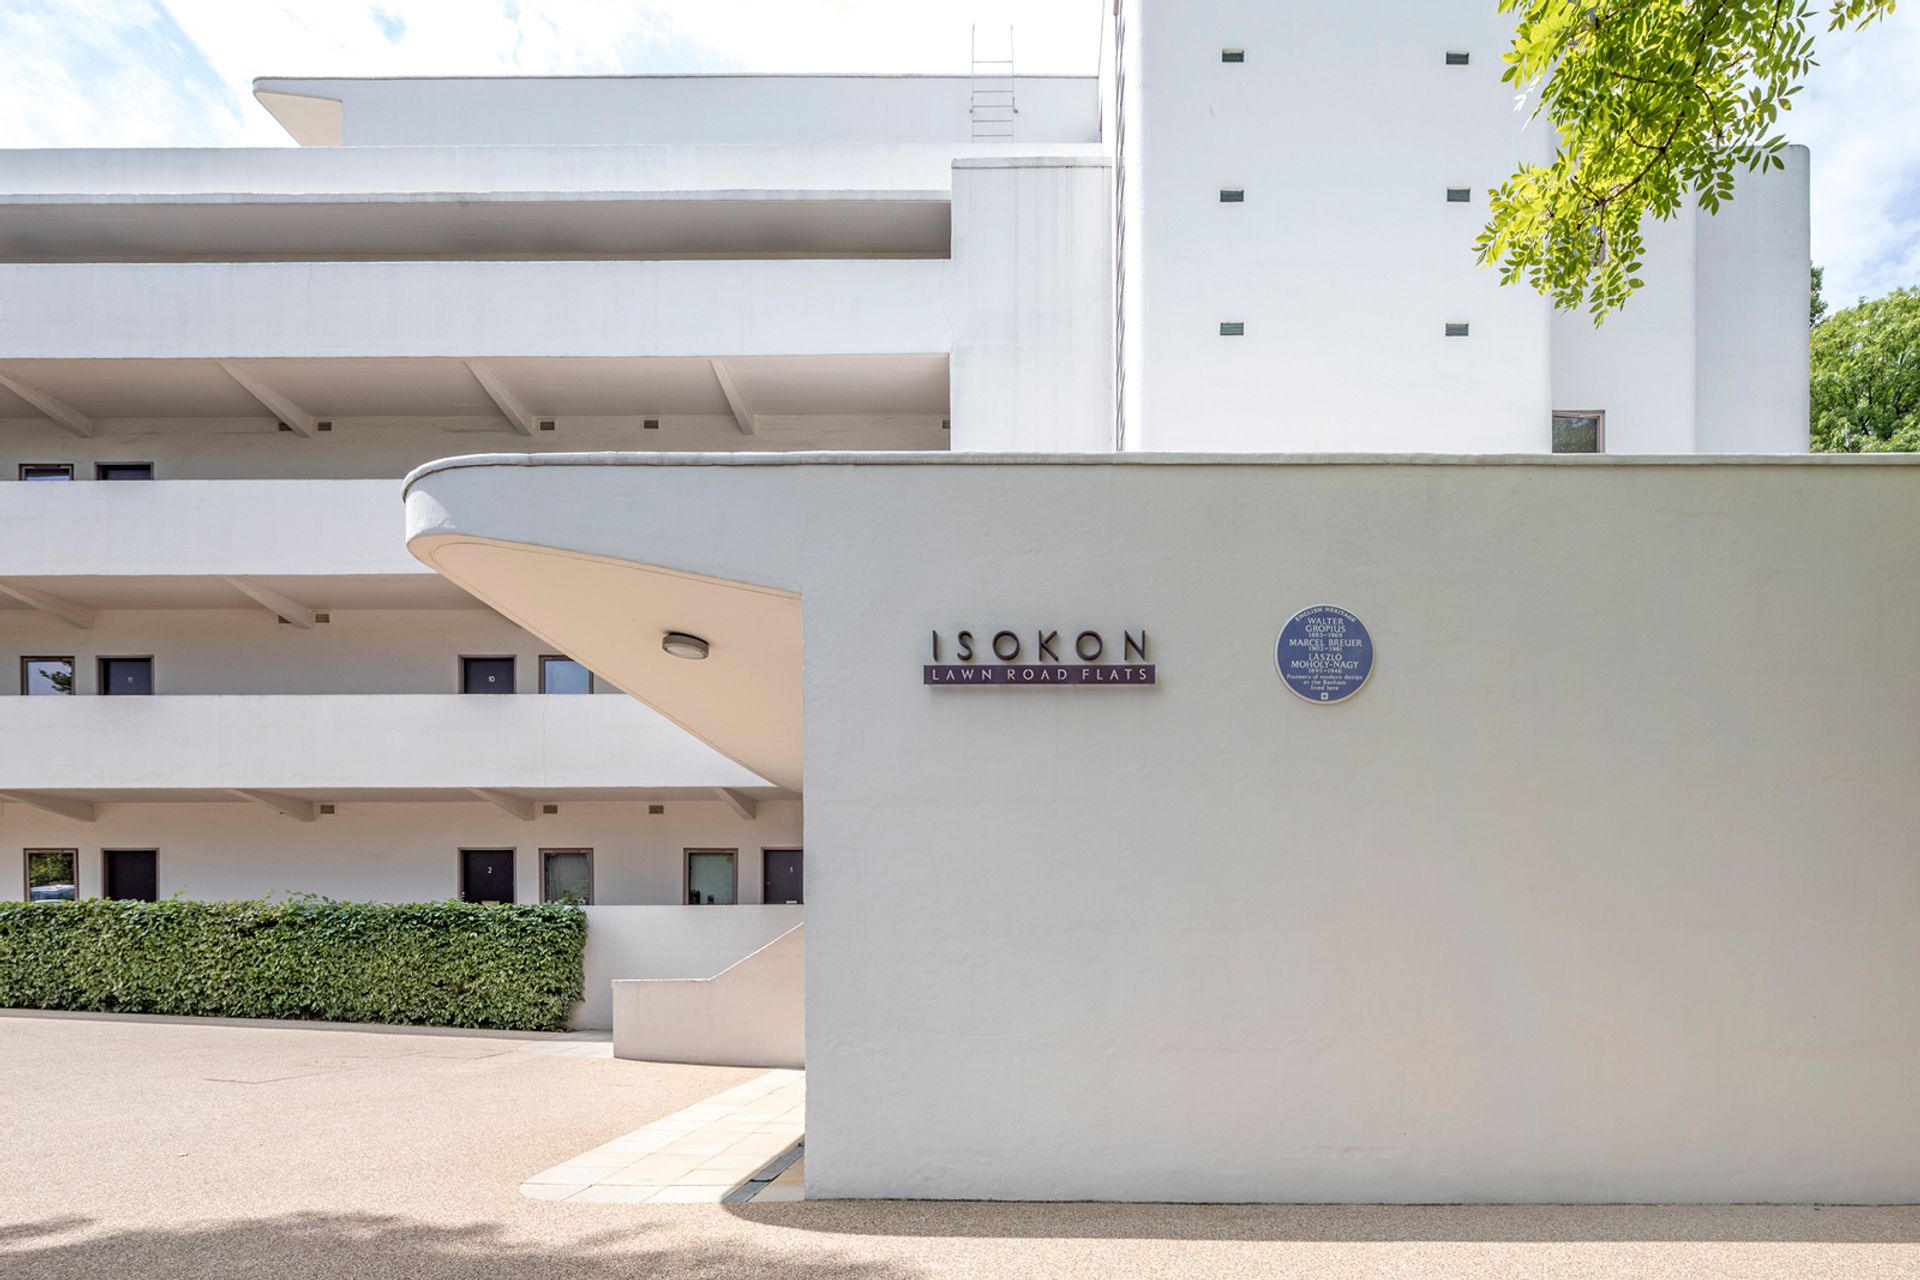 The Isokon building in north London with its new blue plaque English Heritage